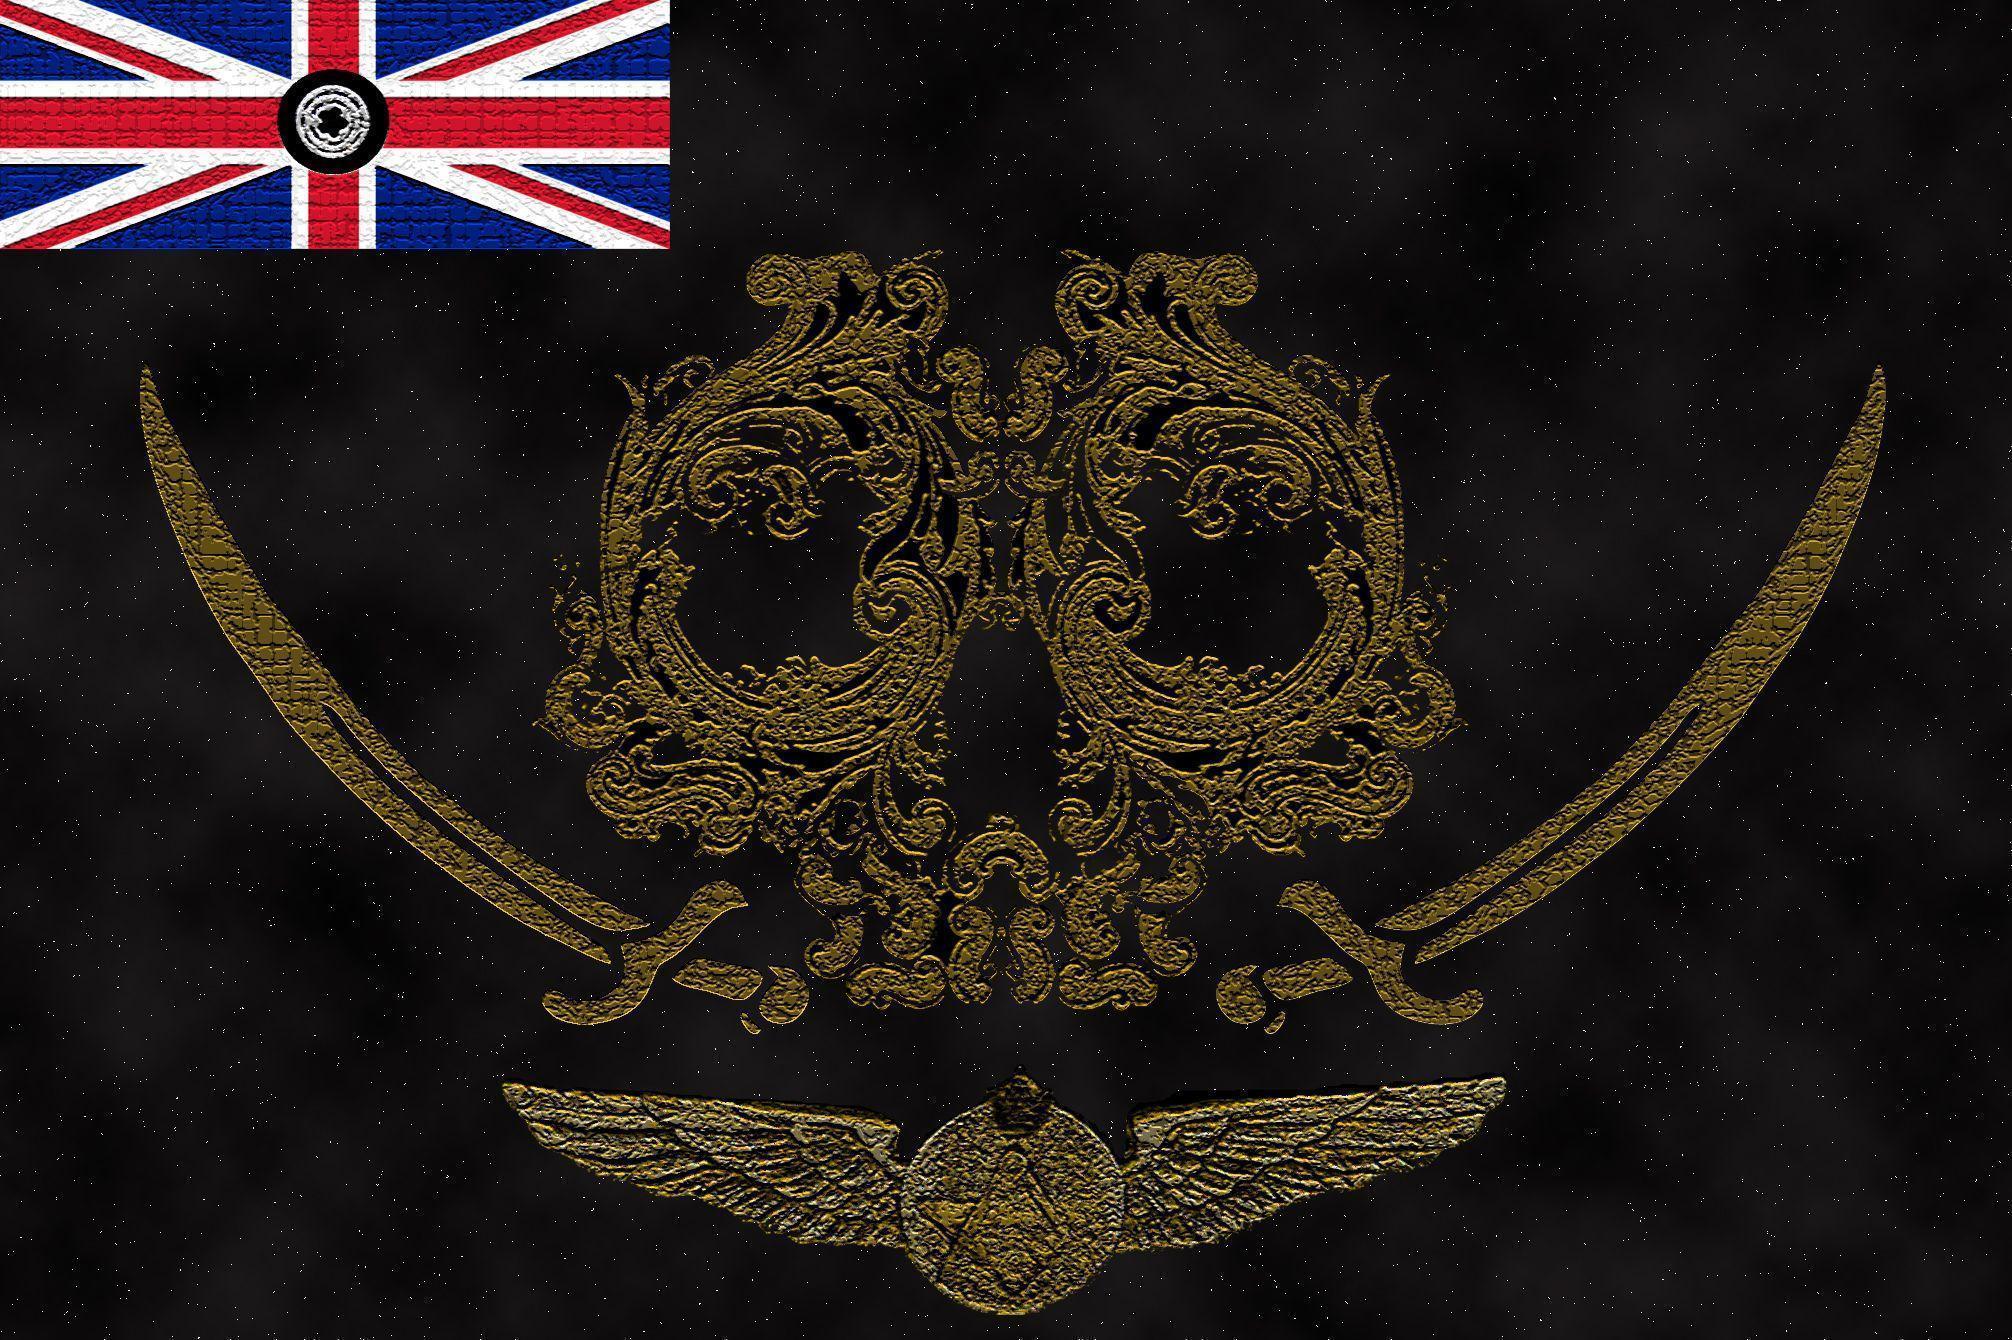 Pirate flag Wallpaper. Wide Wallpaper Collections